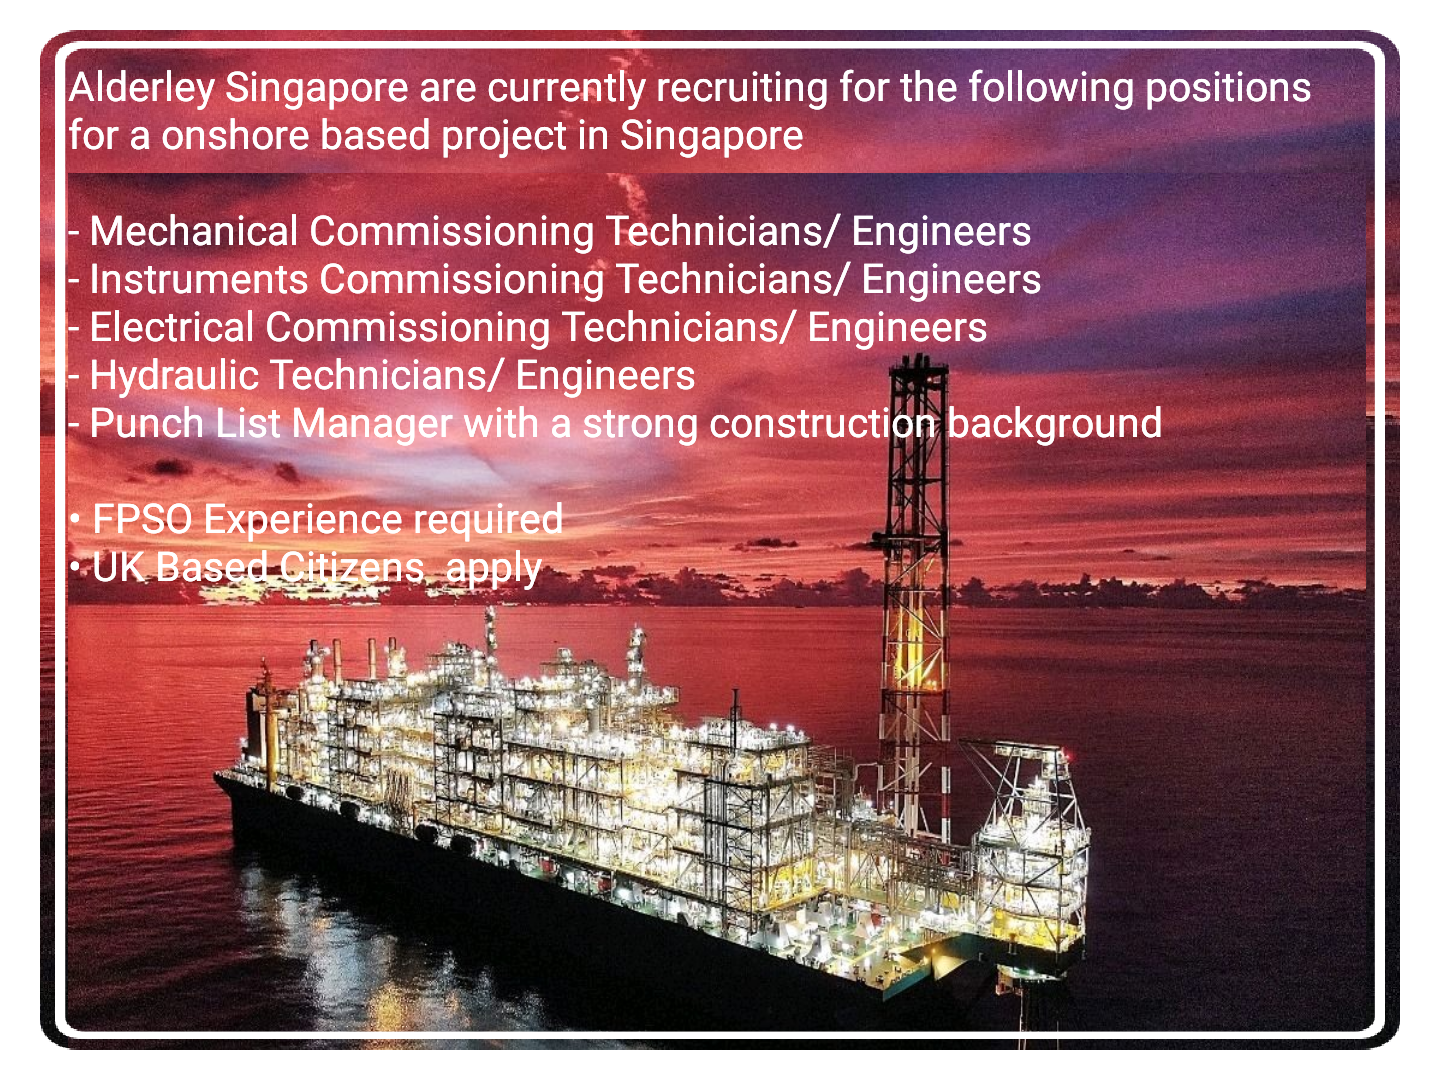 Mechanical, Instrument, Electrical Commissioning Technician & Engineer Jobs